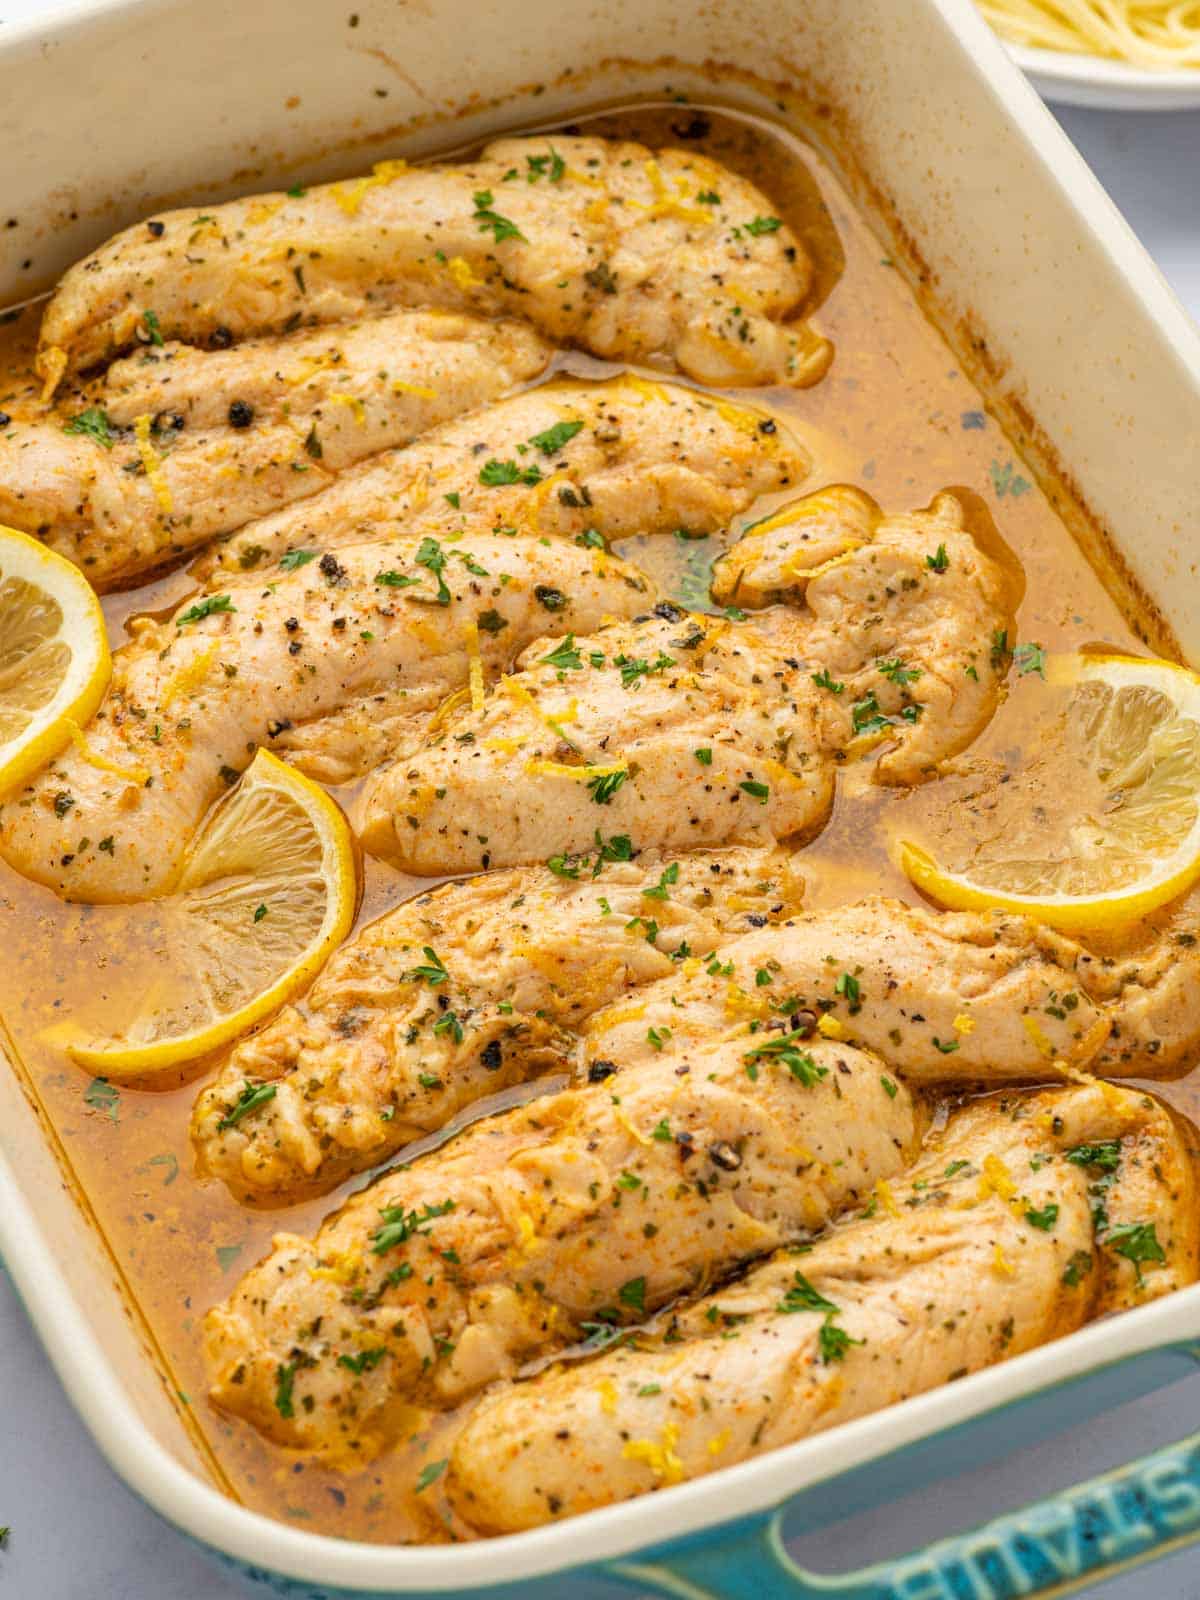 A baking dish with lemon pepper chicken tenders garnished with cilantro and lemon.